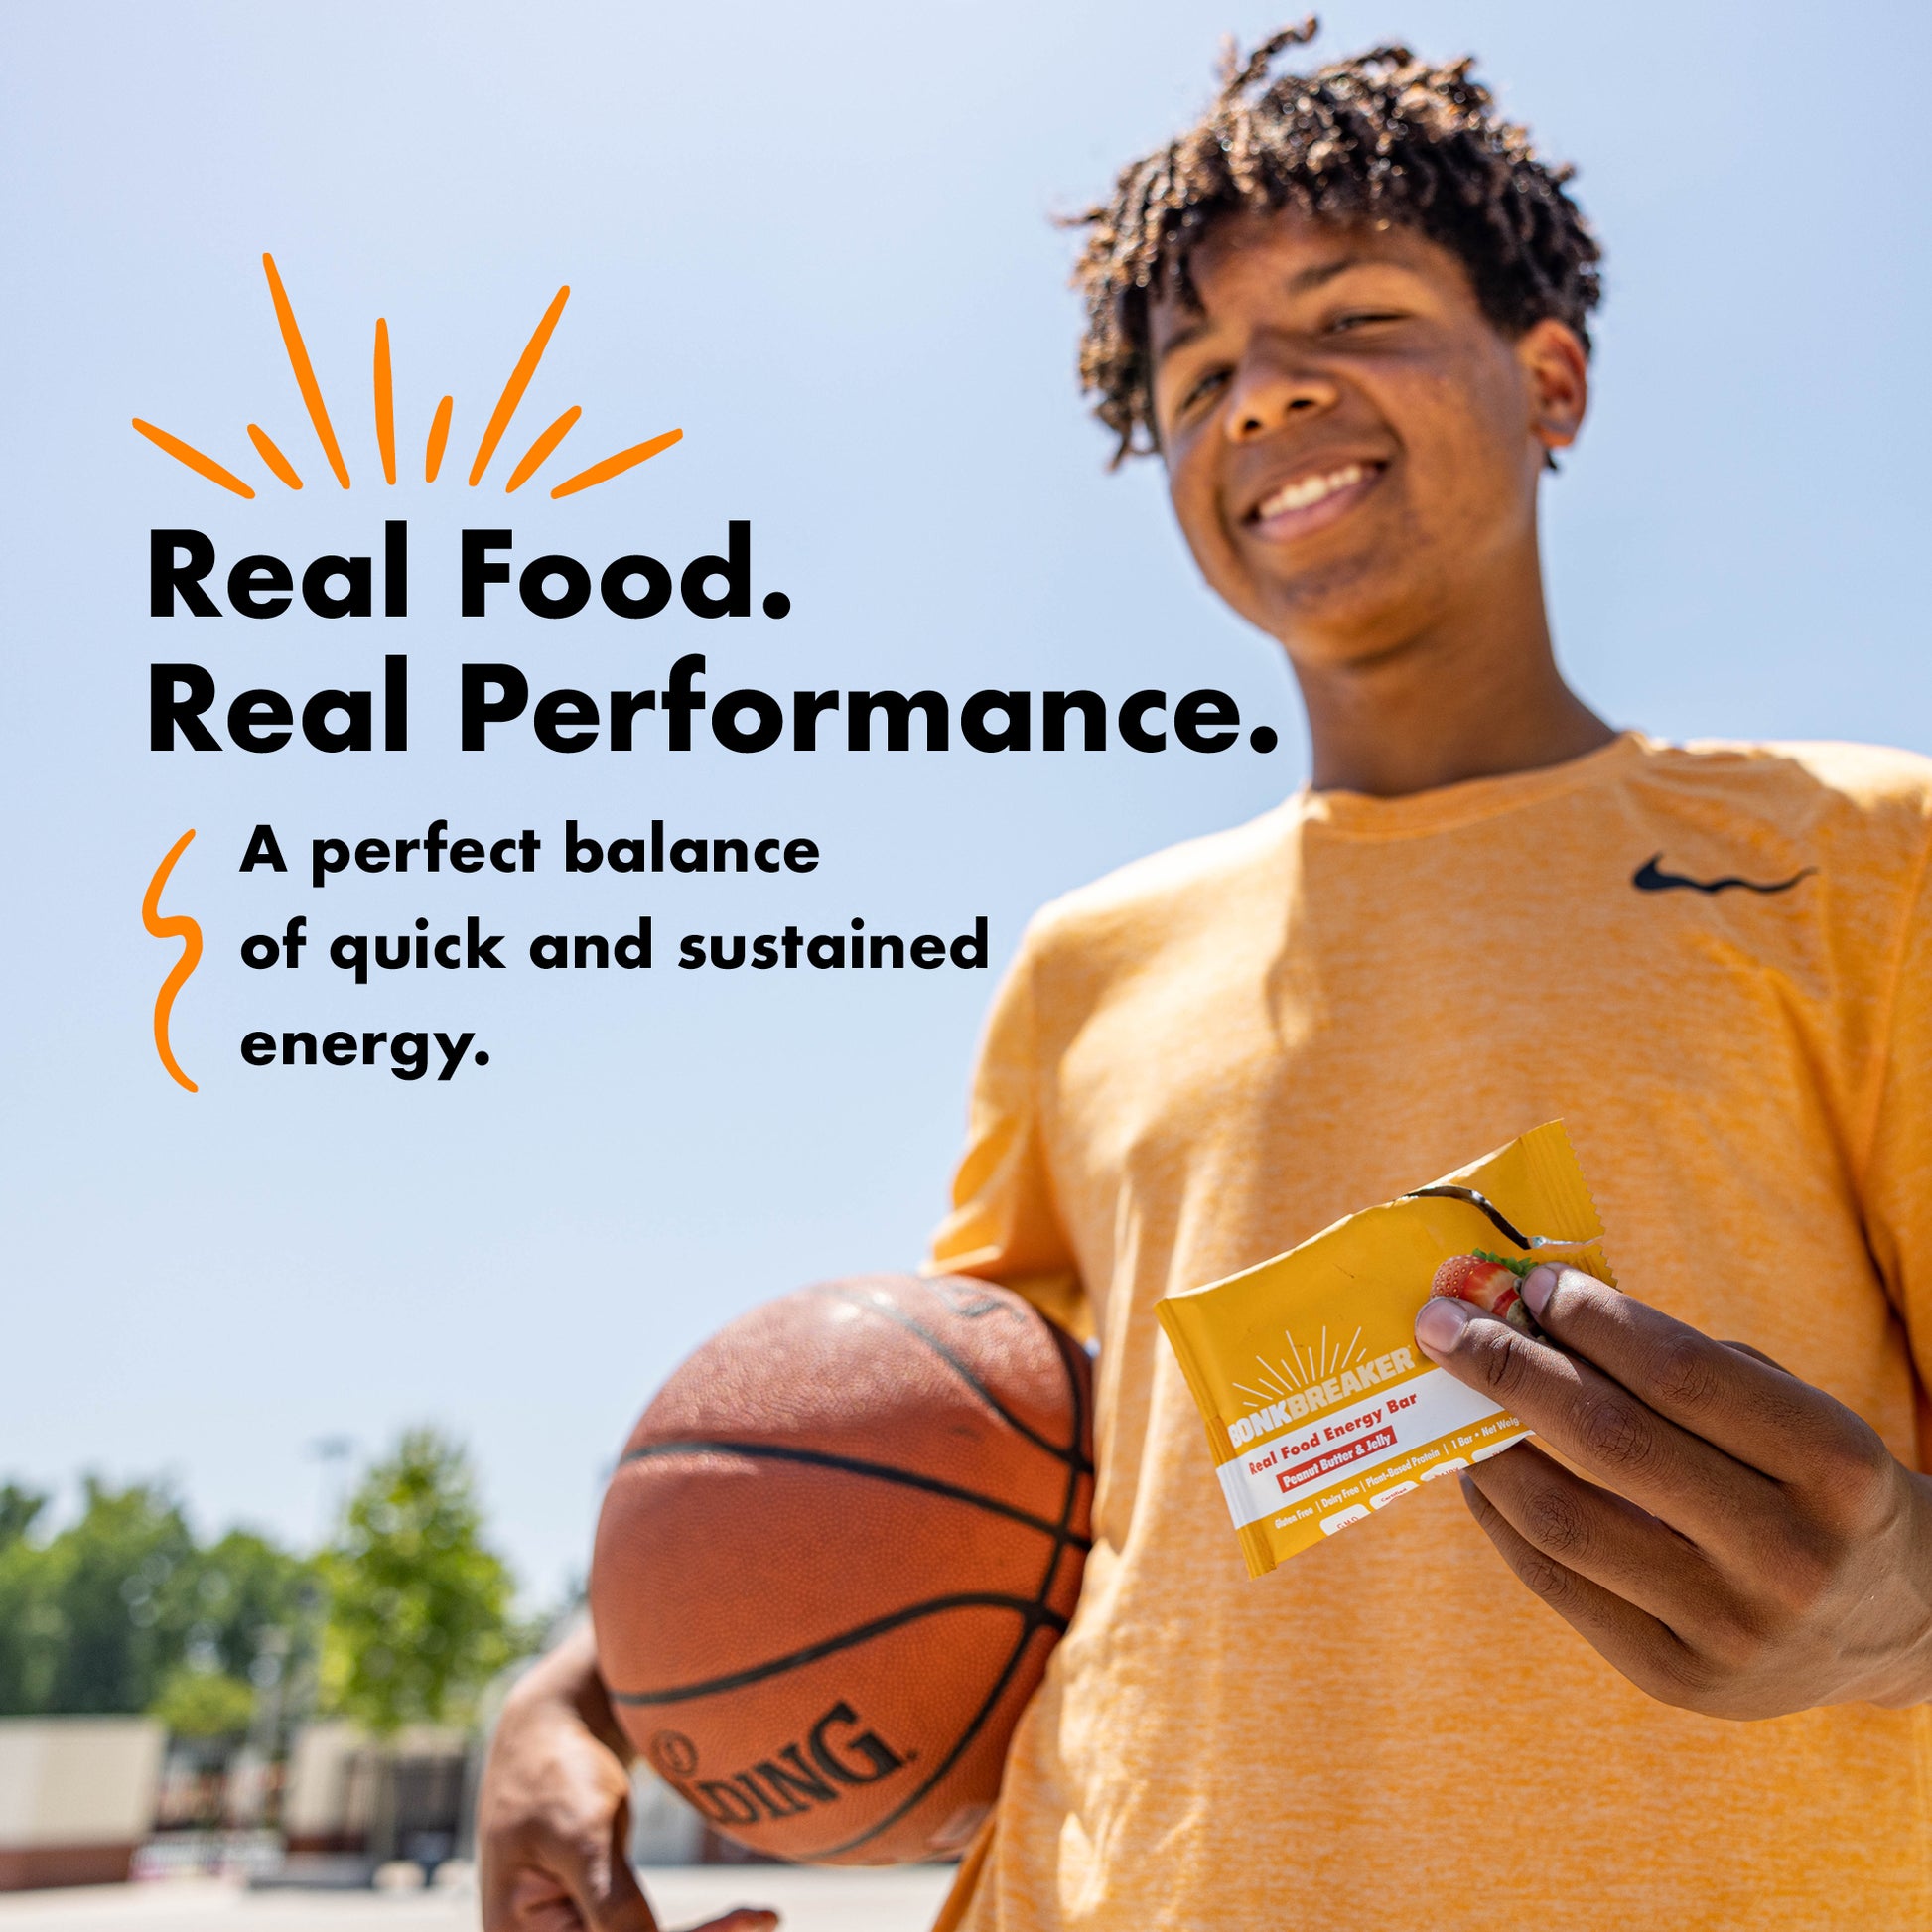 Bonk Breakers Energy Bars - Real Food. Real Performance. A perfect balance of quick and sustained energy.